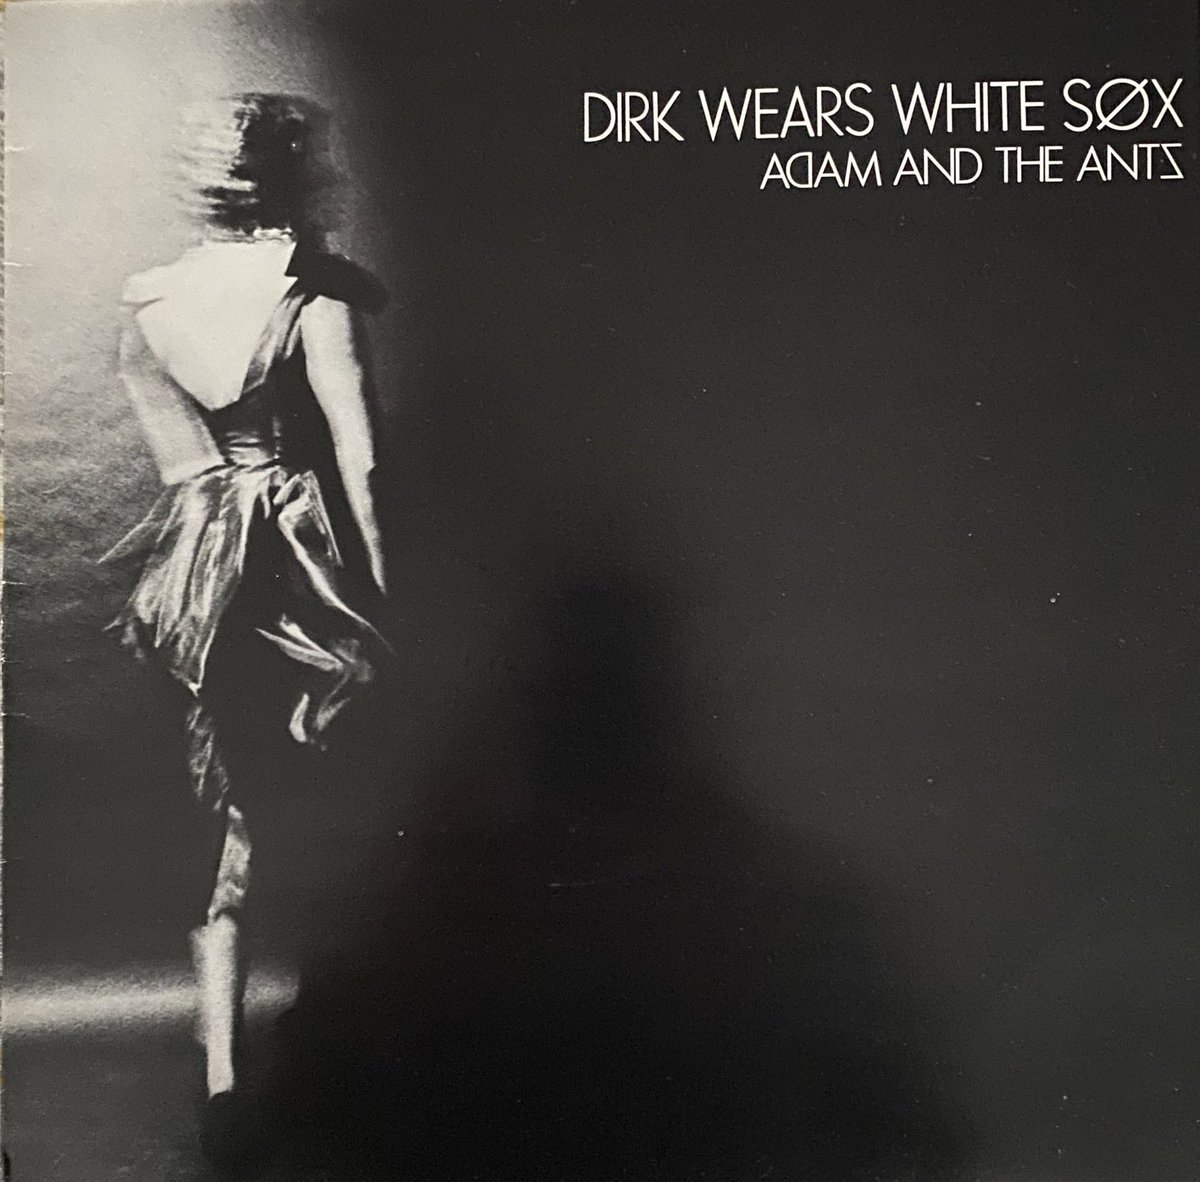 In The Rock 11/30/1979: Adam and the Ants debut LP ‘Dirk Wears White Sox’ is released in the UK. It will hit #1 on the album chart. #AdamAnt #RockHonorRoll